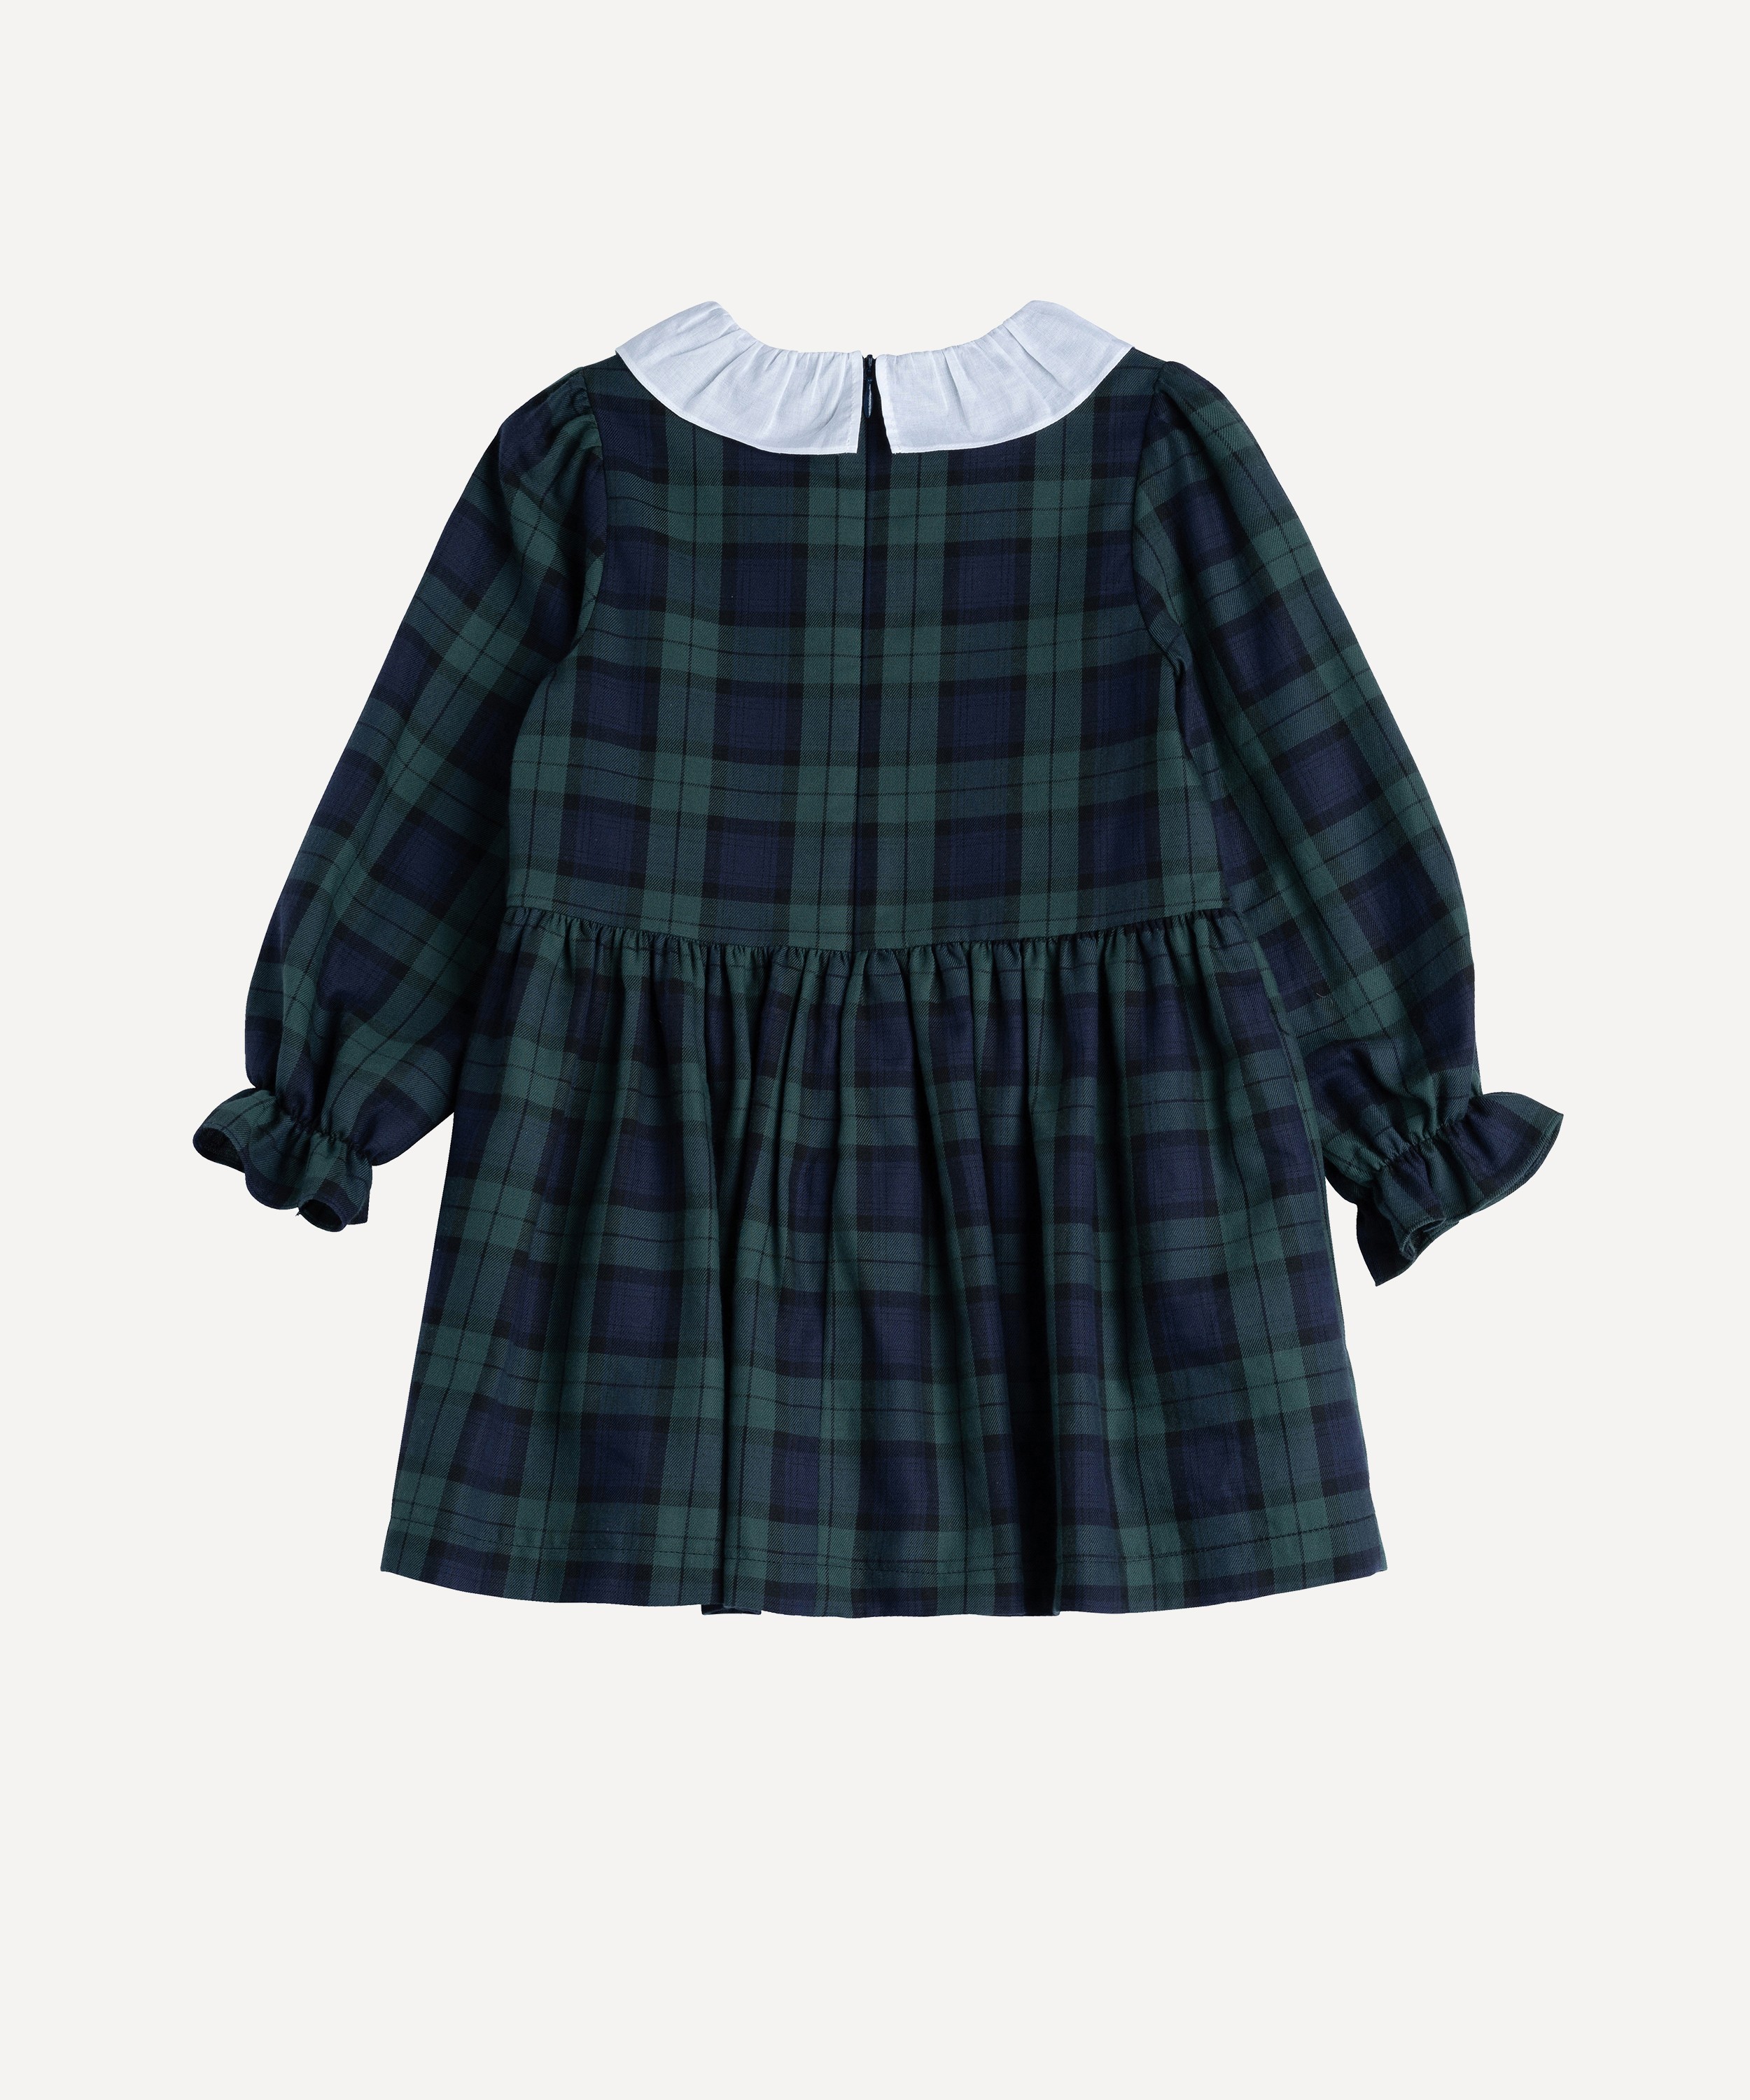 Trotters - Tabitha Willow Tartan Dress 2-5 Years image number 1